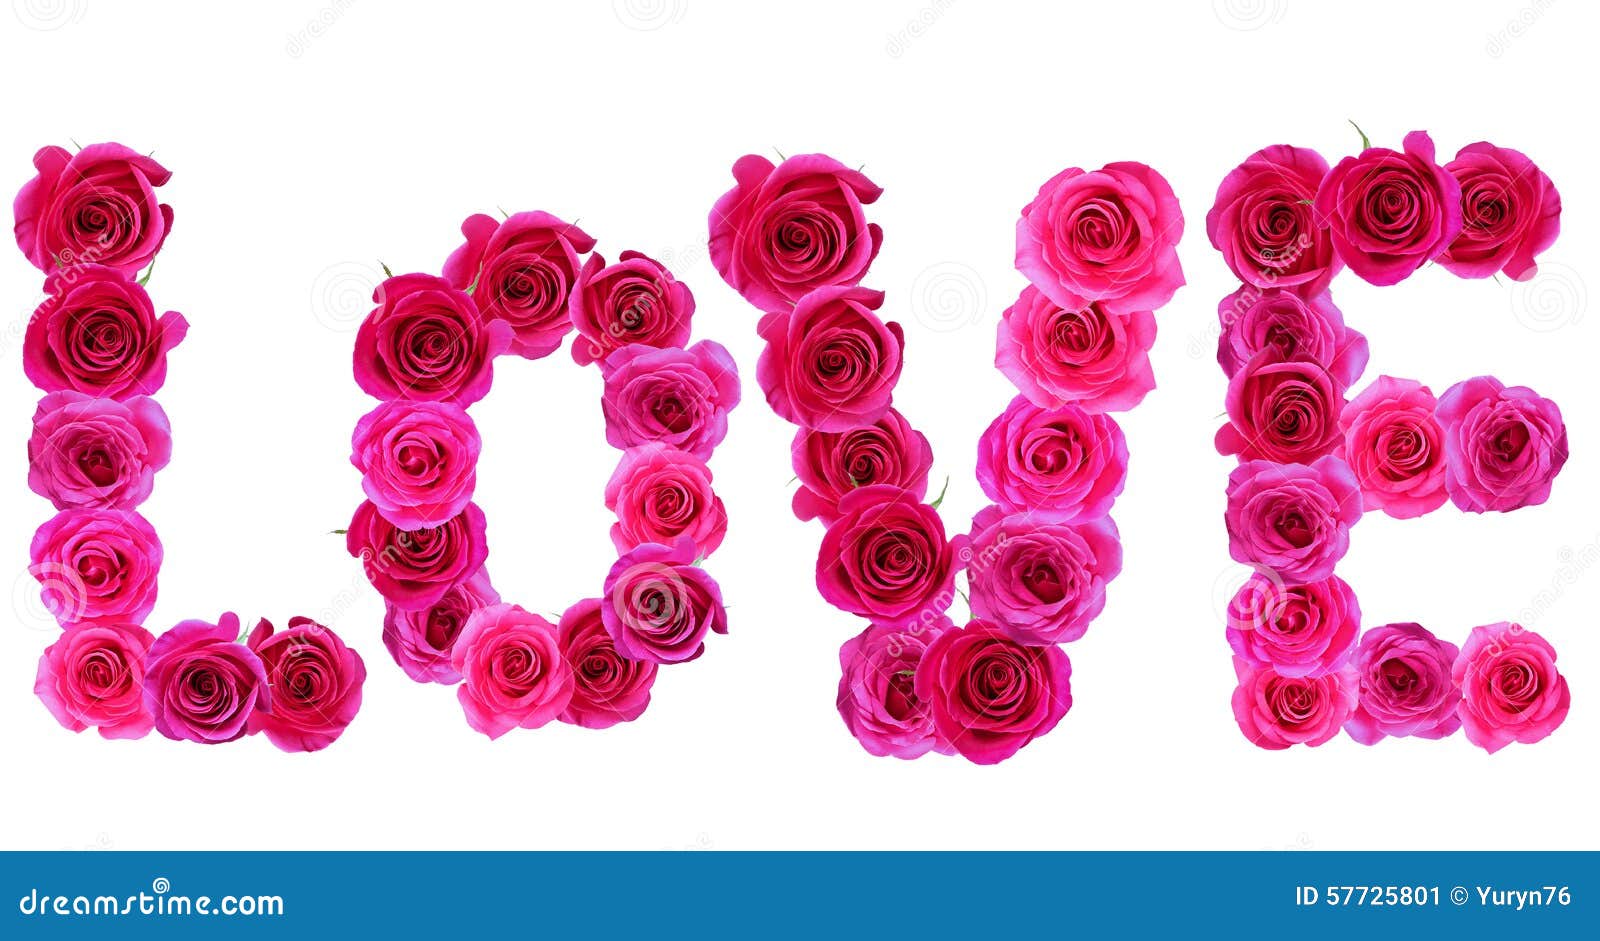 Word love with roses stock image. Image of message, shape - 57725801